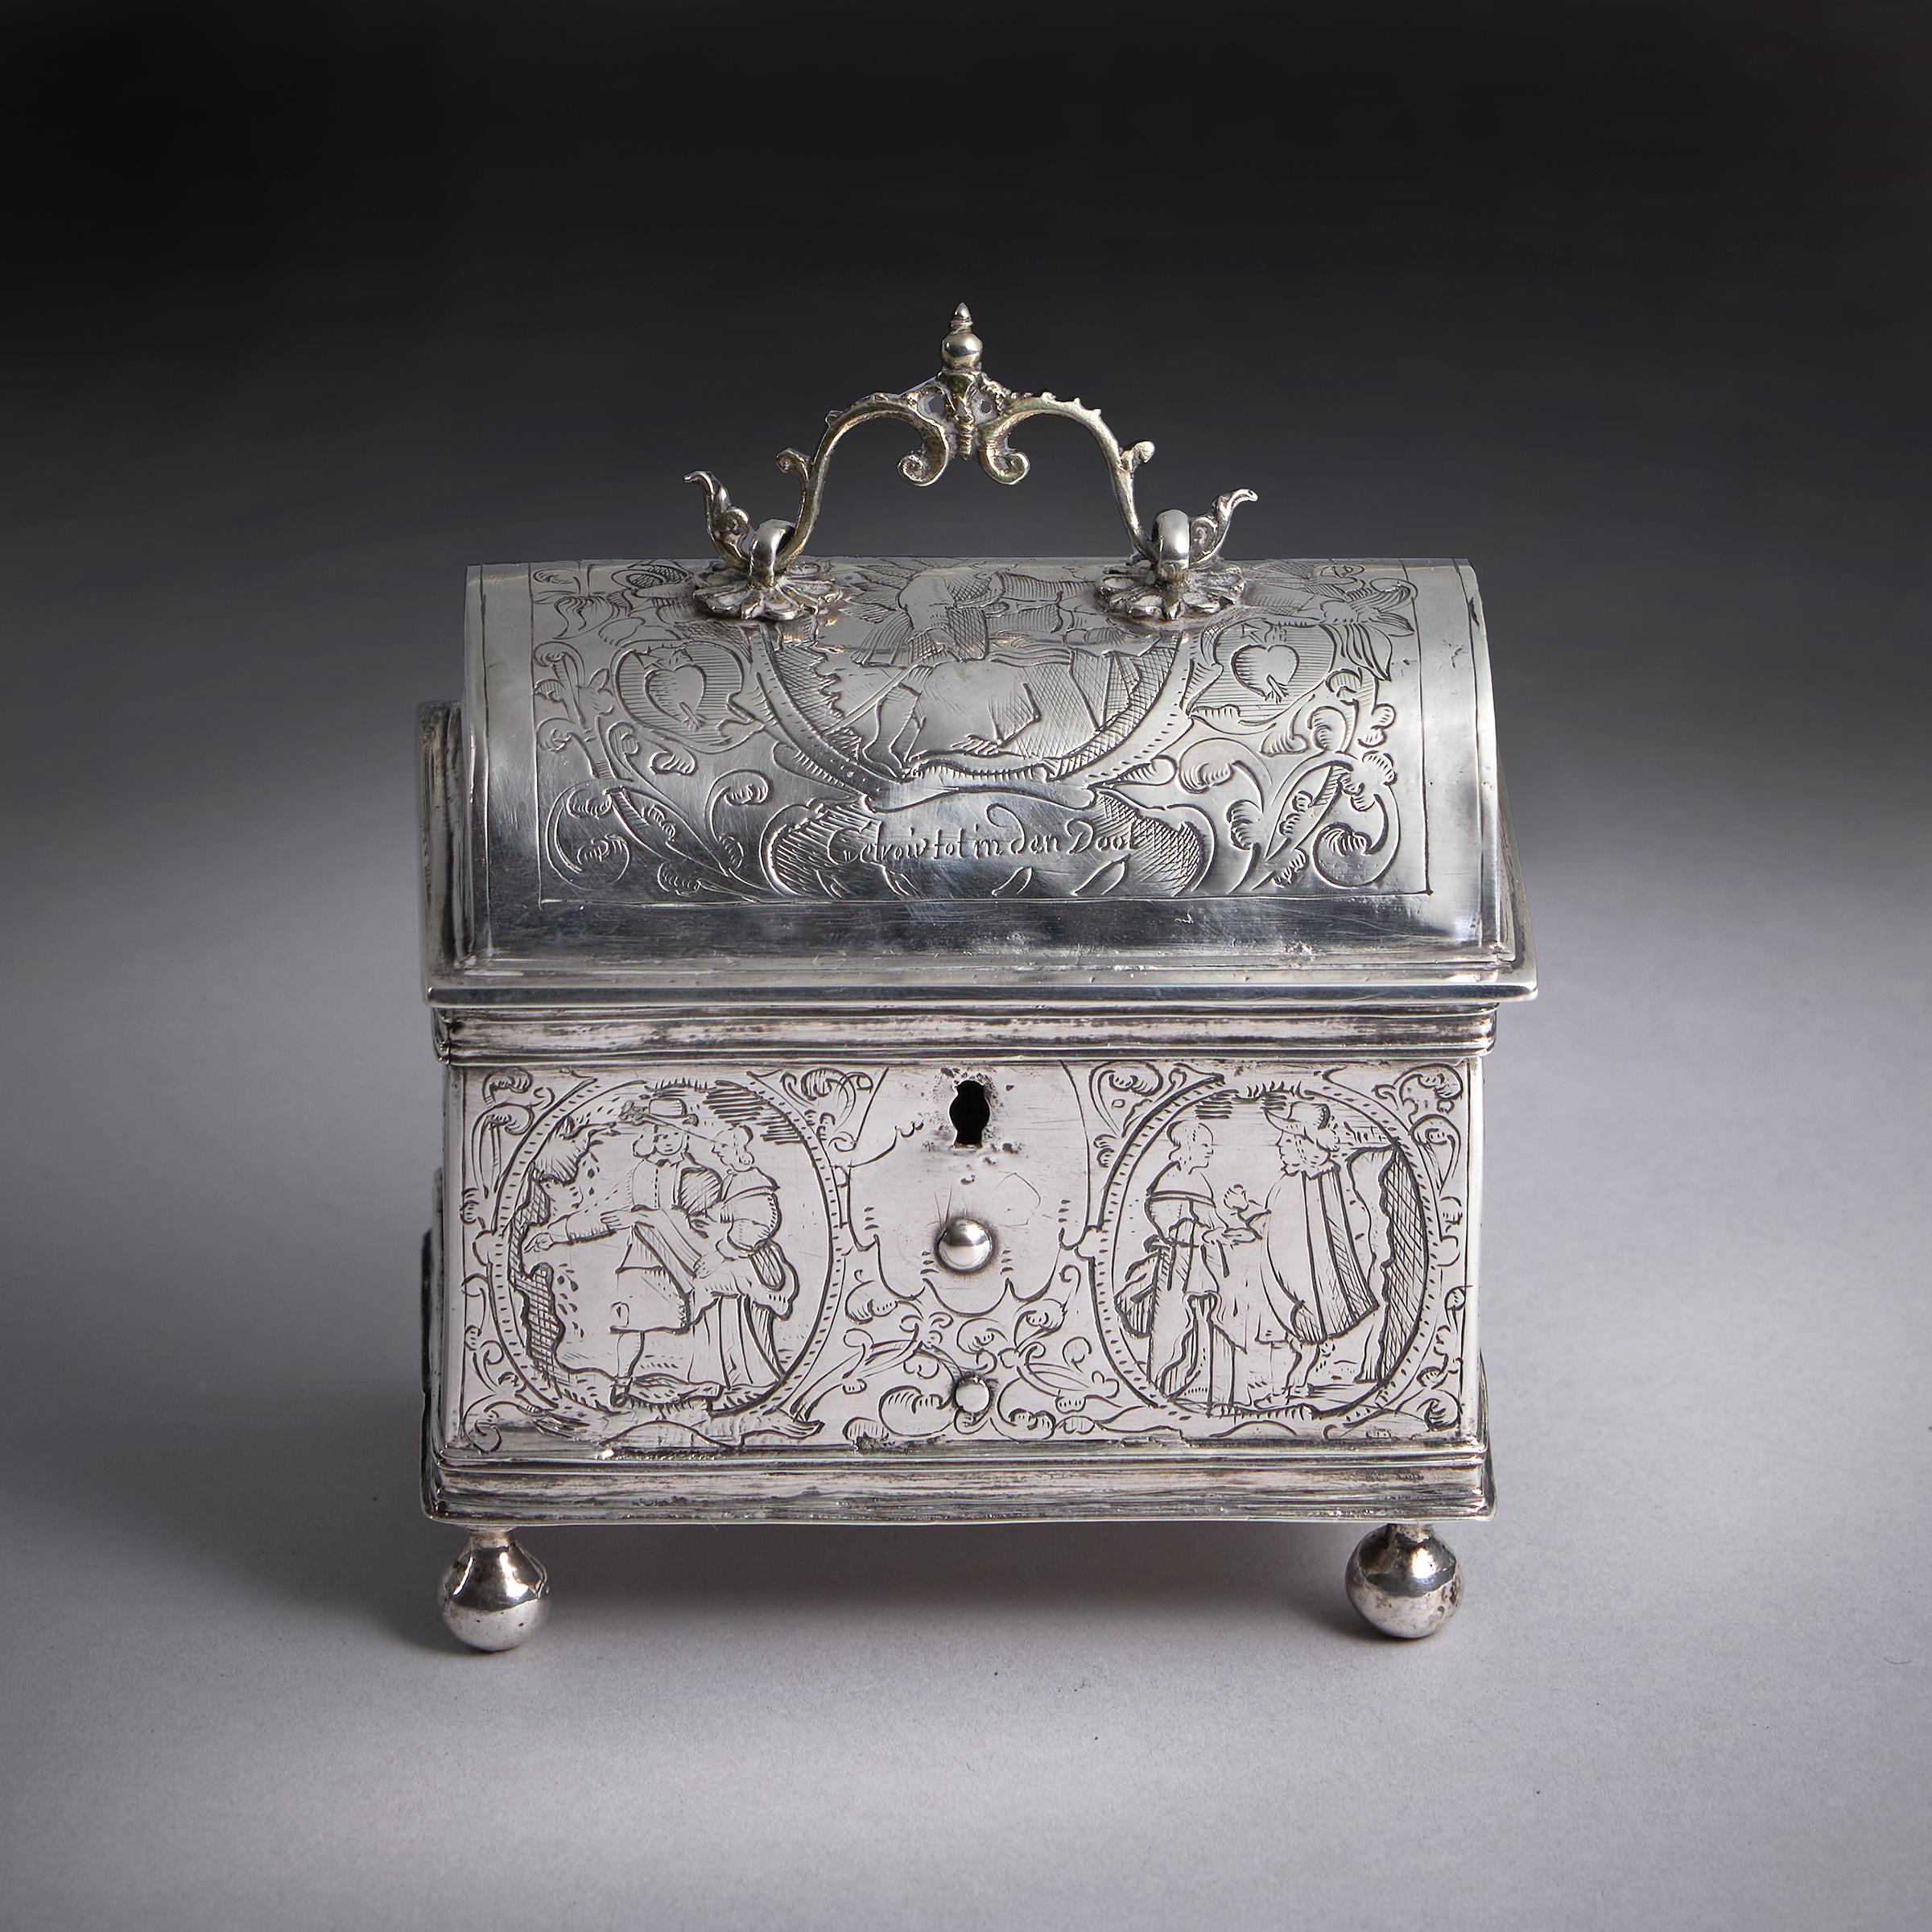 Mid 17th Century Dutch Engraved Silver Wedding Casket or knottekist, Circa 1660 In Good Condition For Sale In Oxfordshire, United Kingdom